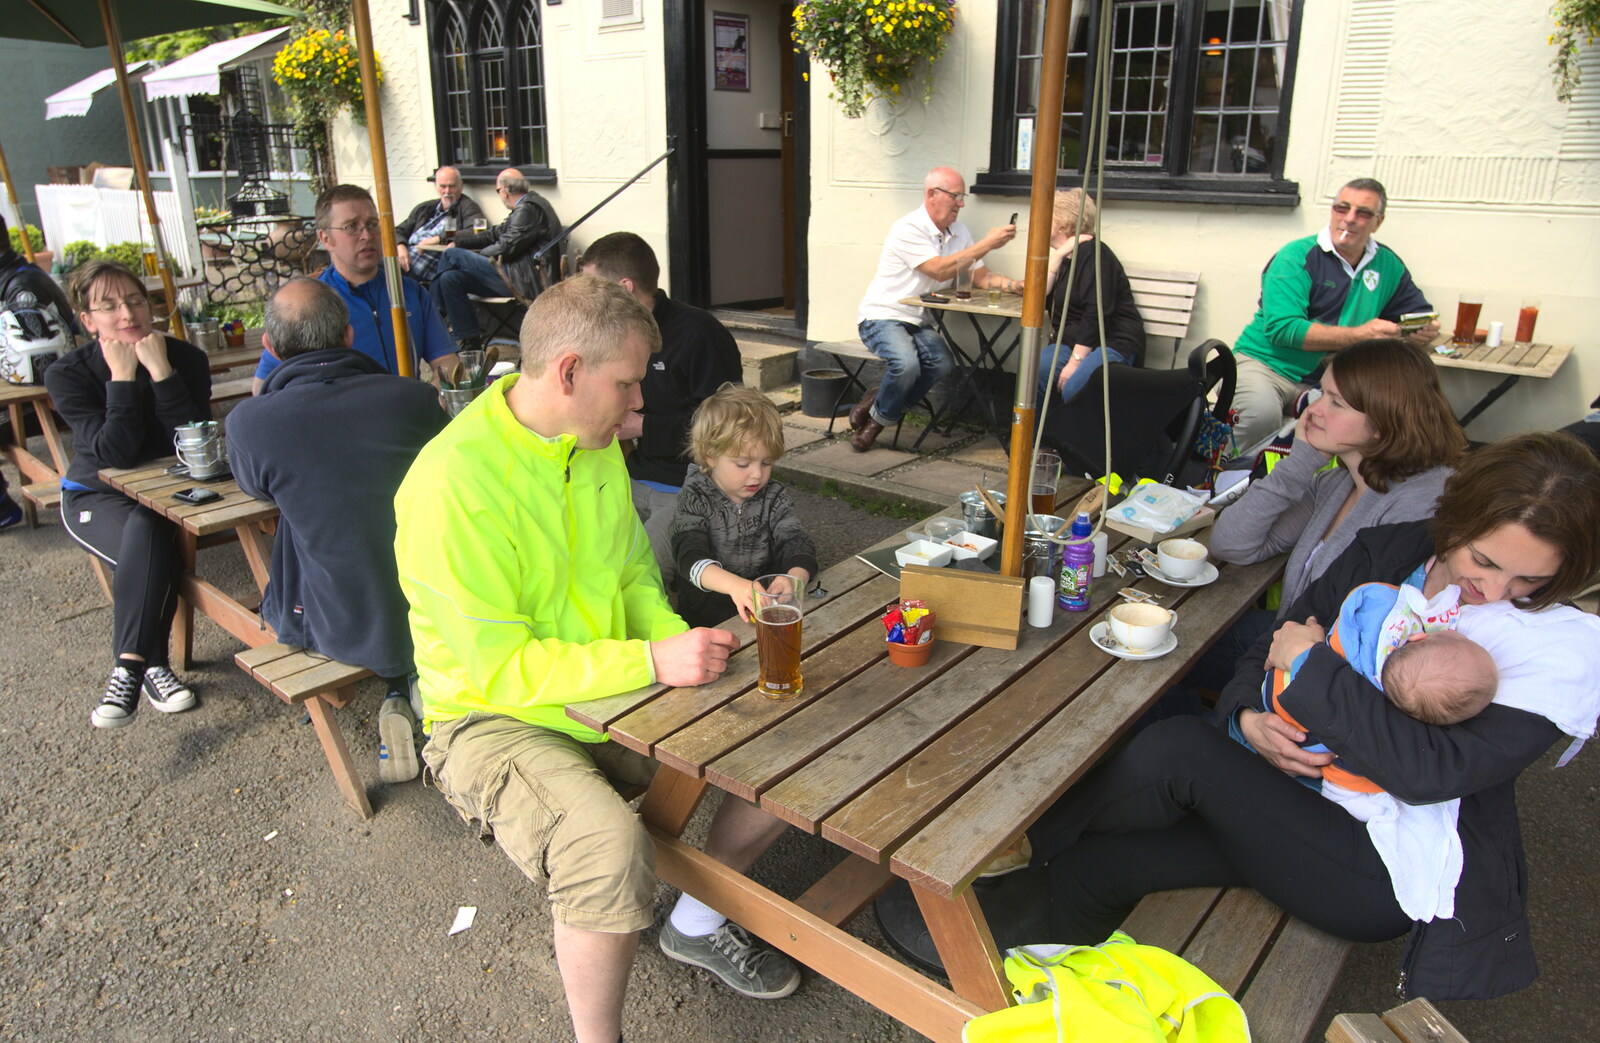 The hardcore group remains at the pub from The BSCC Cycling Weekend, The Swan Inn, Thaxted, Essex - 12th May 2012